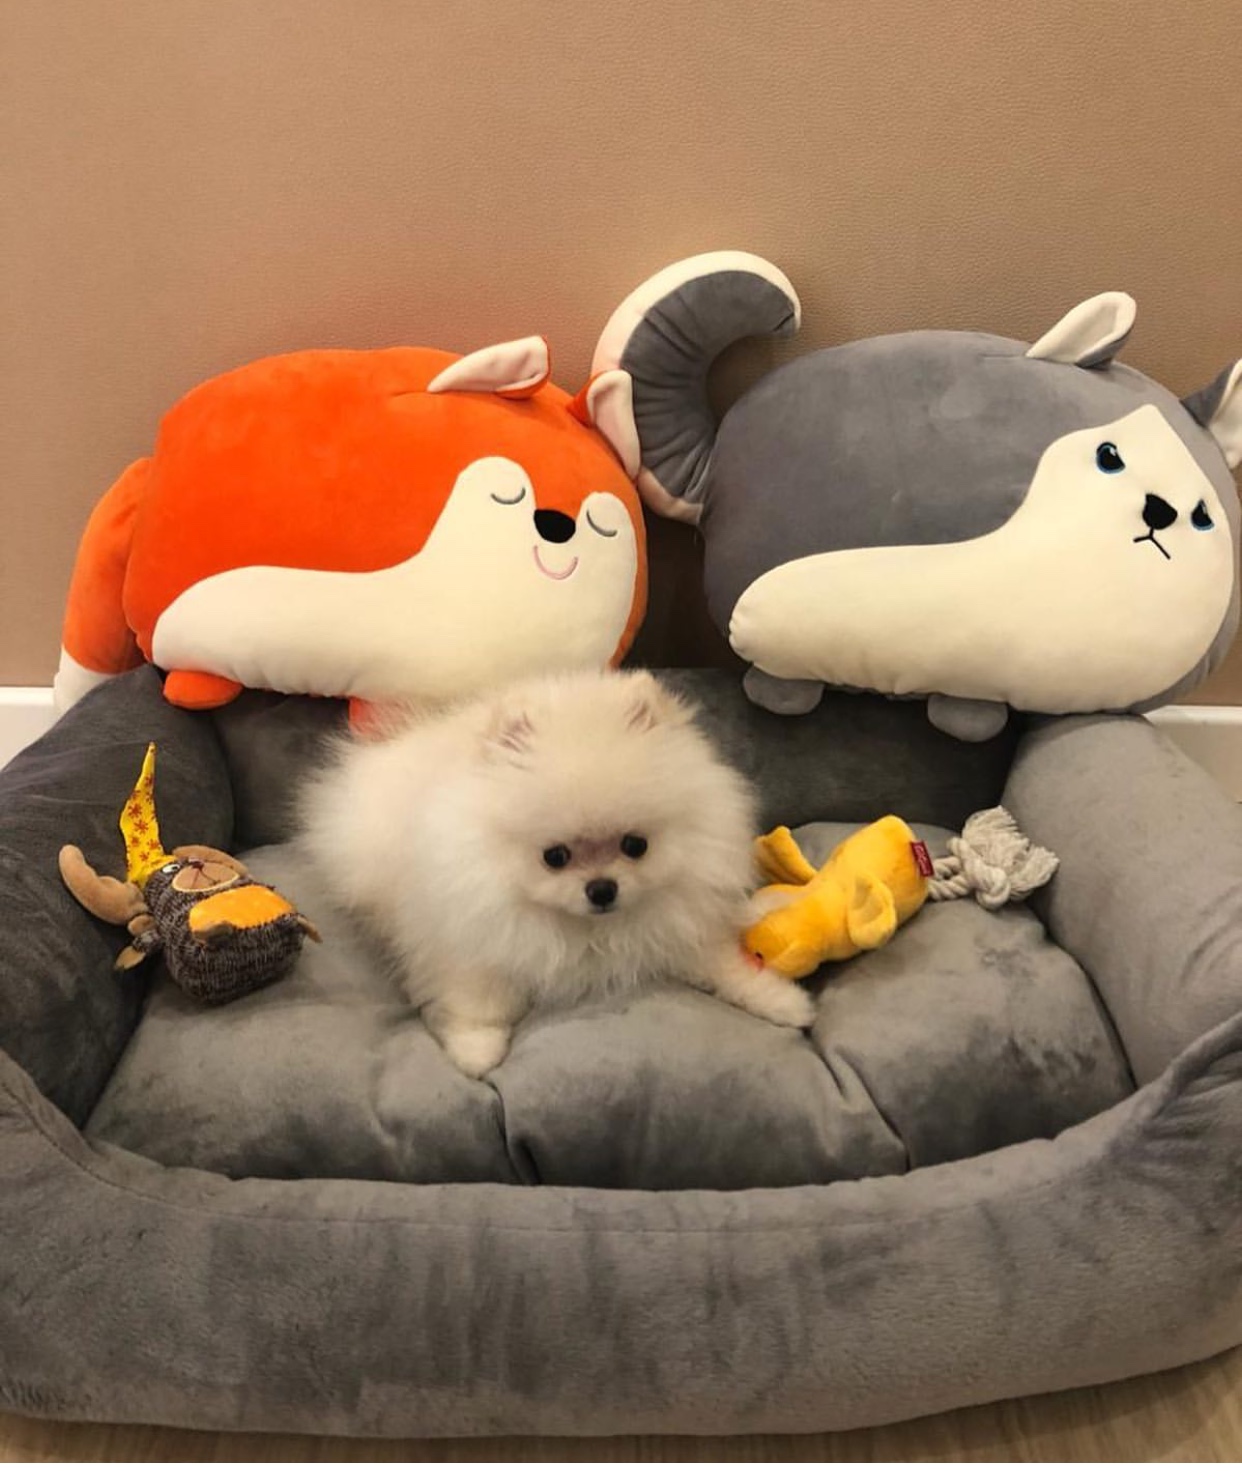 Pomeranian lying on the bed with its stuffed toys